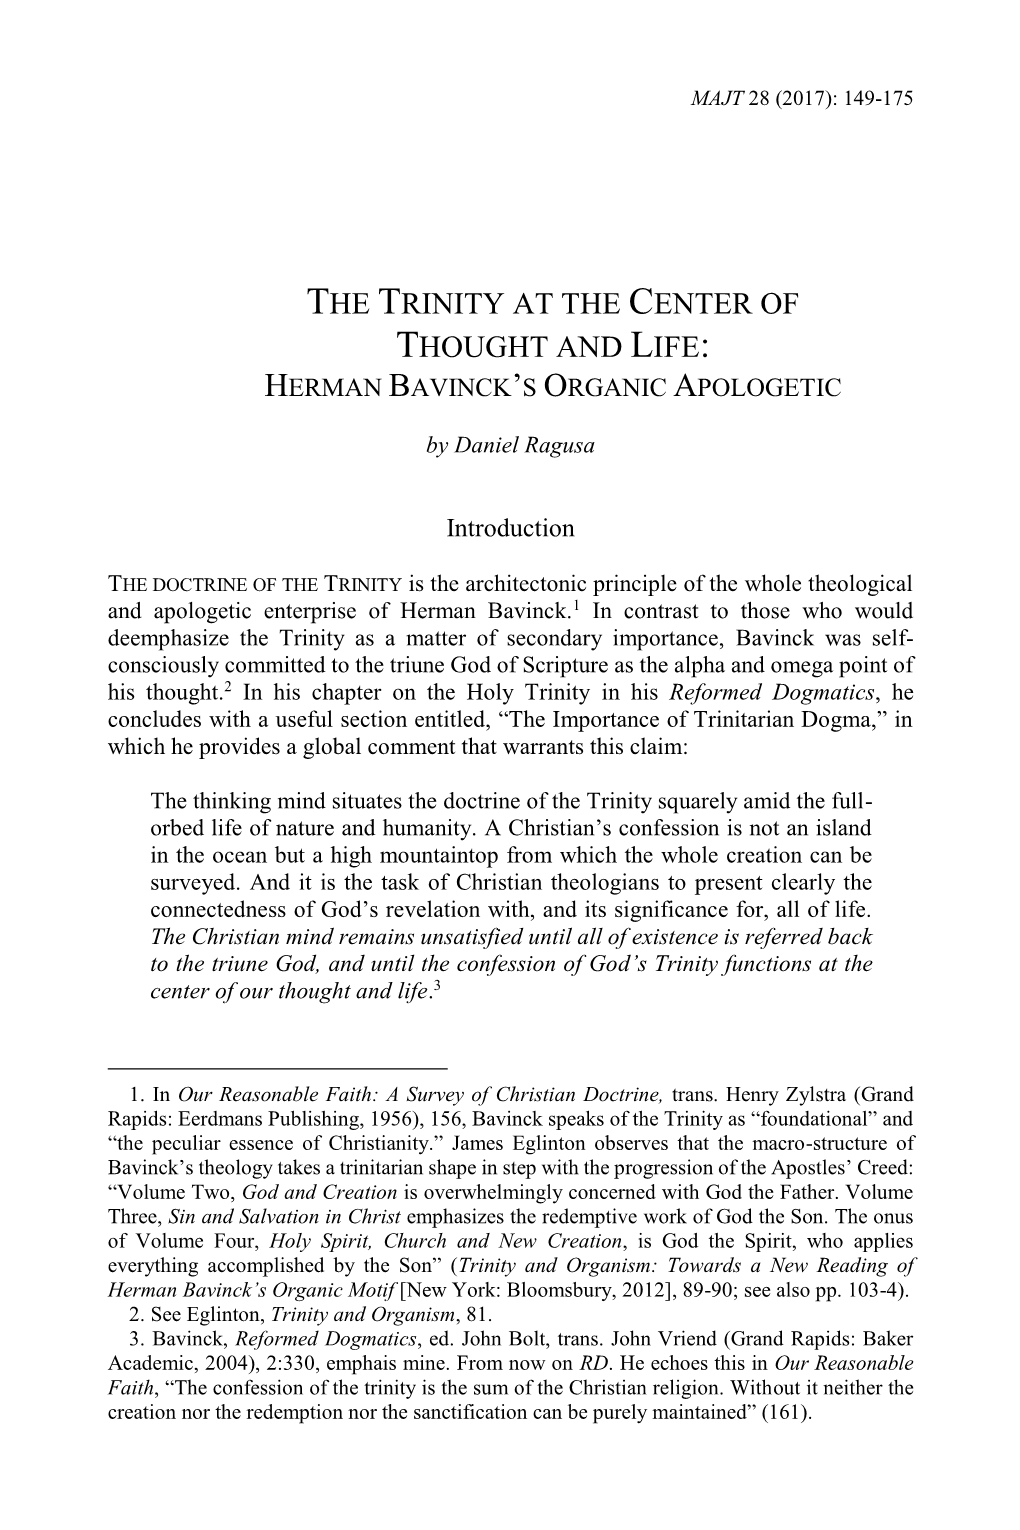 The Trinity at the Center of Thought and Life: Herman Bavinck’S Organic Apologetic